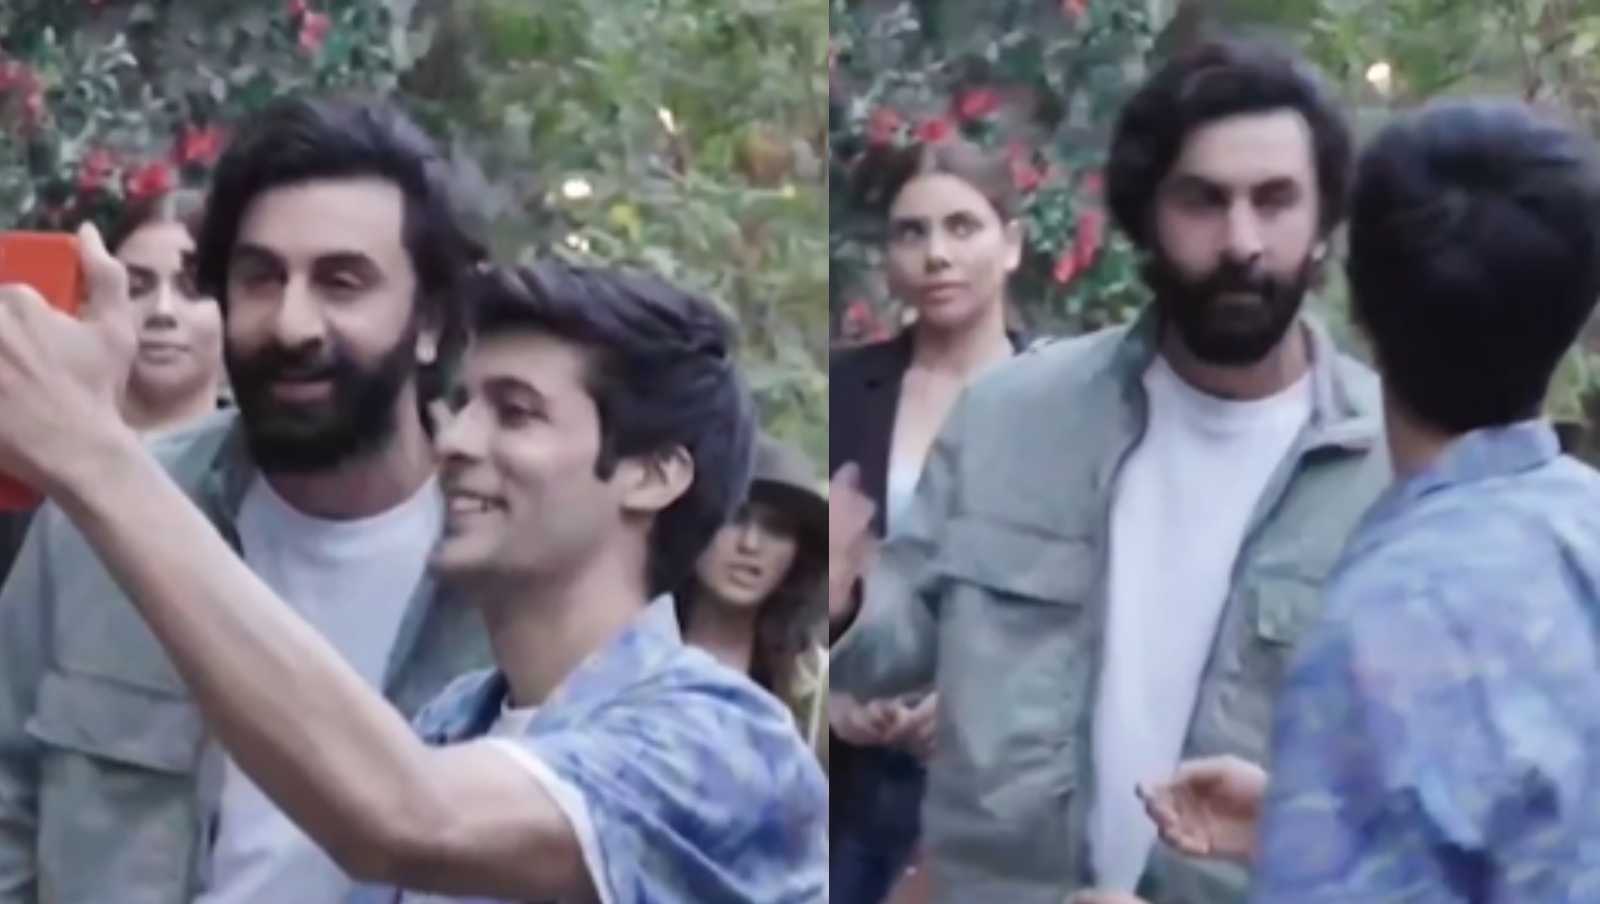 'Aur karo Bollywood ko support' : Fans are shocked to see Ranbir Kapoor throw a fan's phone while taking a selfie